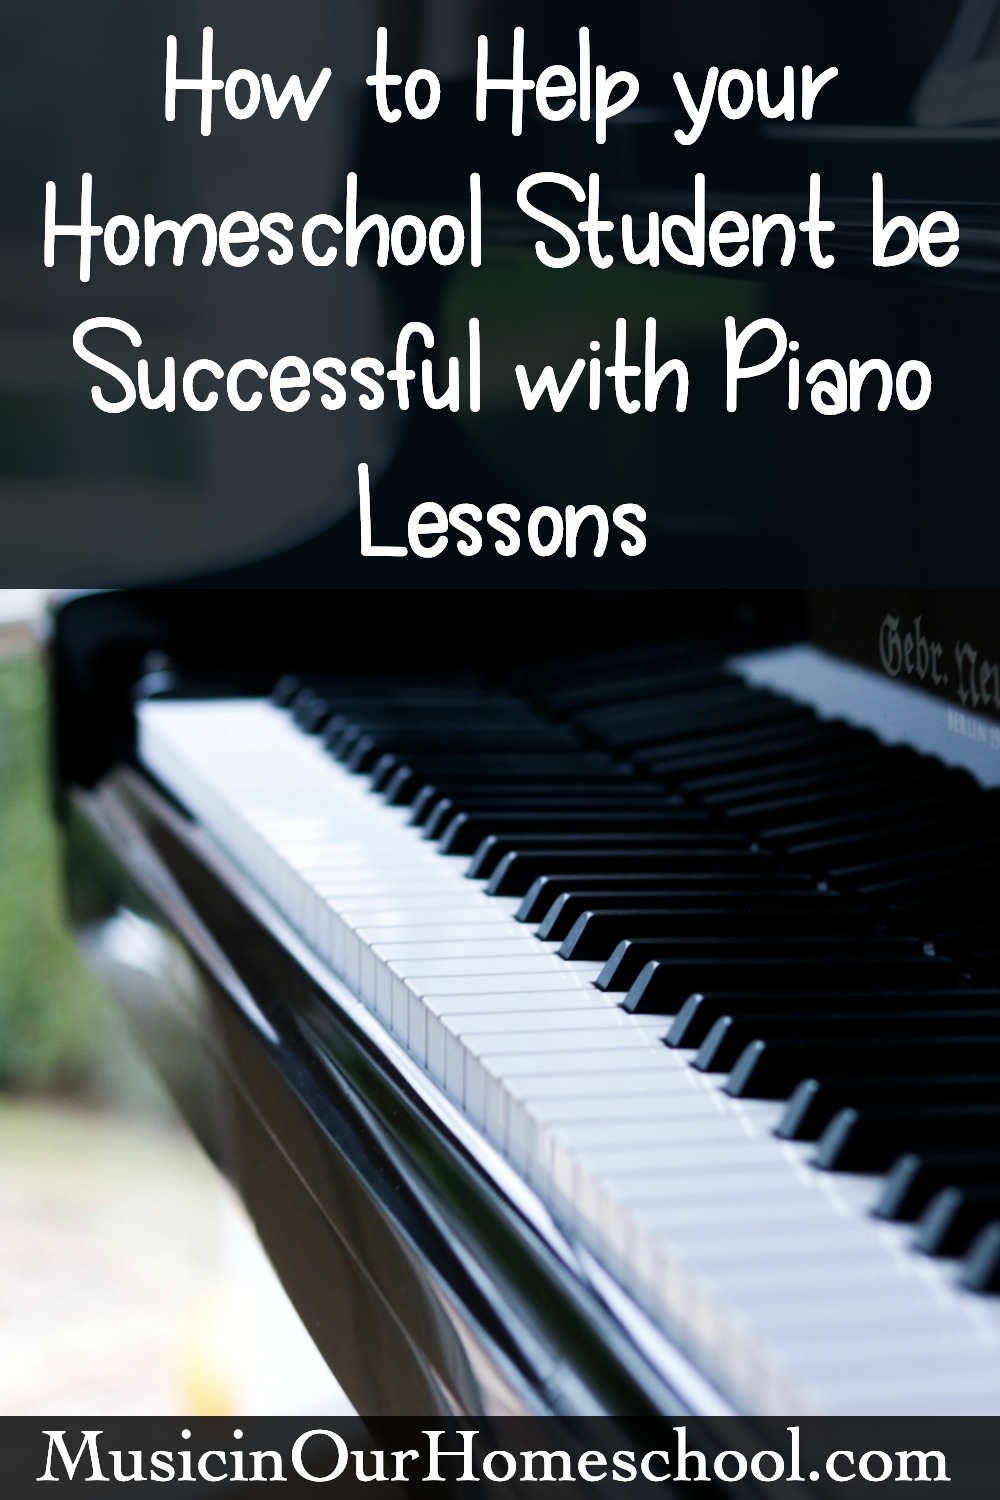 How to Help your Homeschool Student be Successful with Piano Lessons. Tips from a piano teacher #pianolessons #pianoteacher #homeschoolmusic #musicinourhomeschool